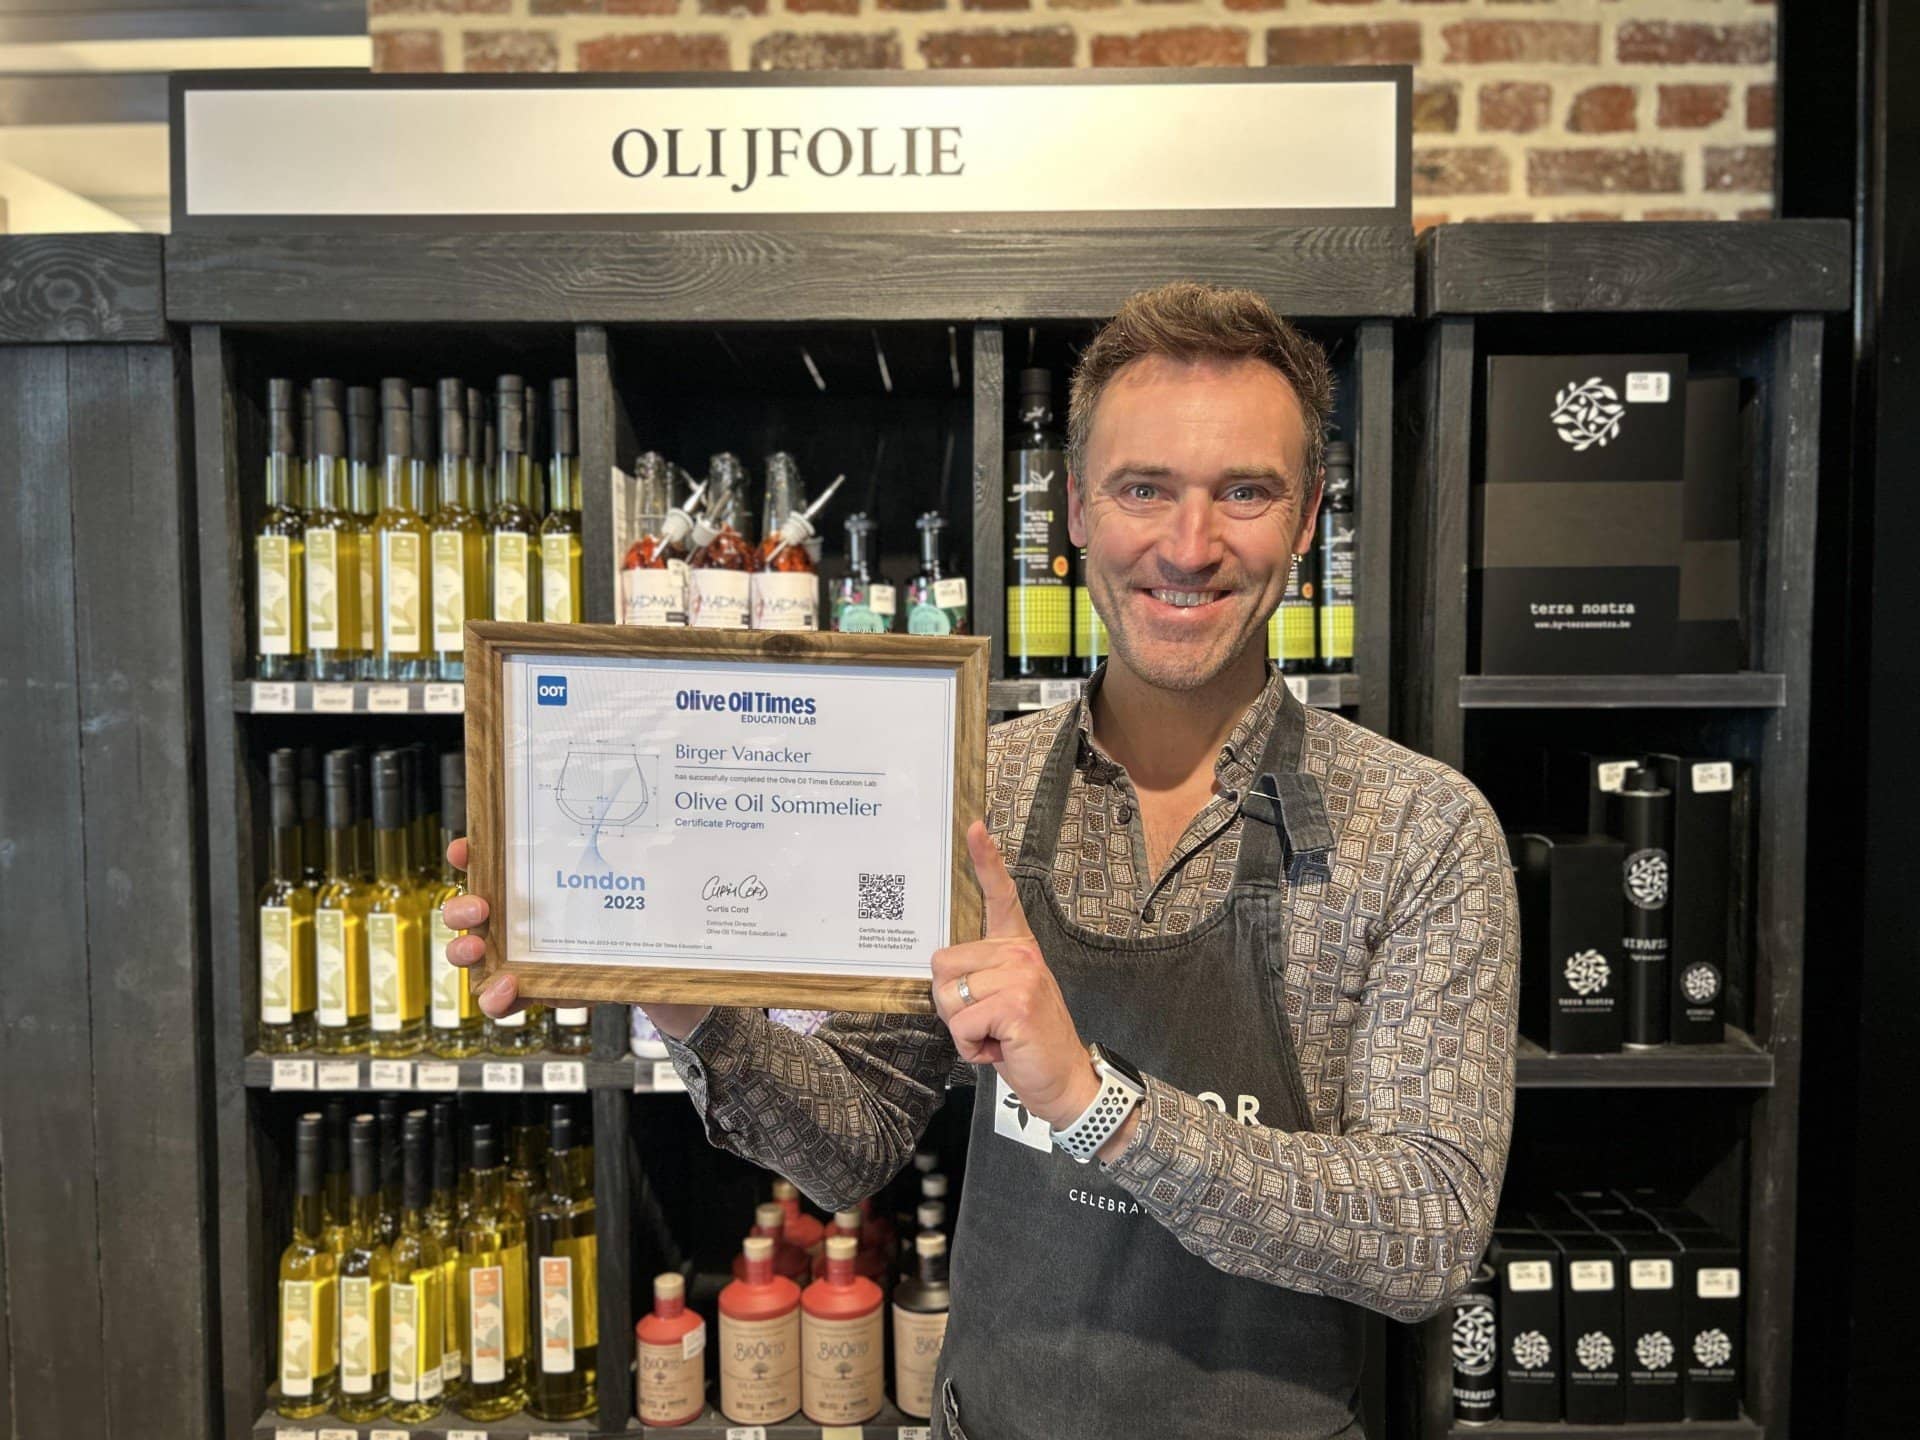 europe-tasting-olive-oil-cooking-with-olive-oil-31-complete-sommelier-certification-course-in-london-olive-oil-times